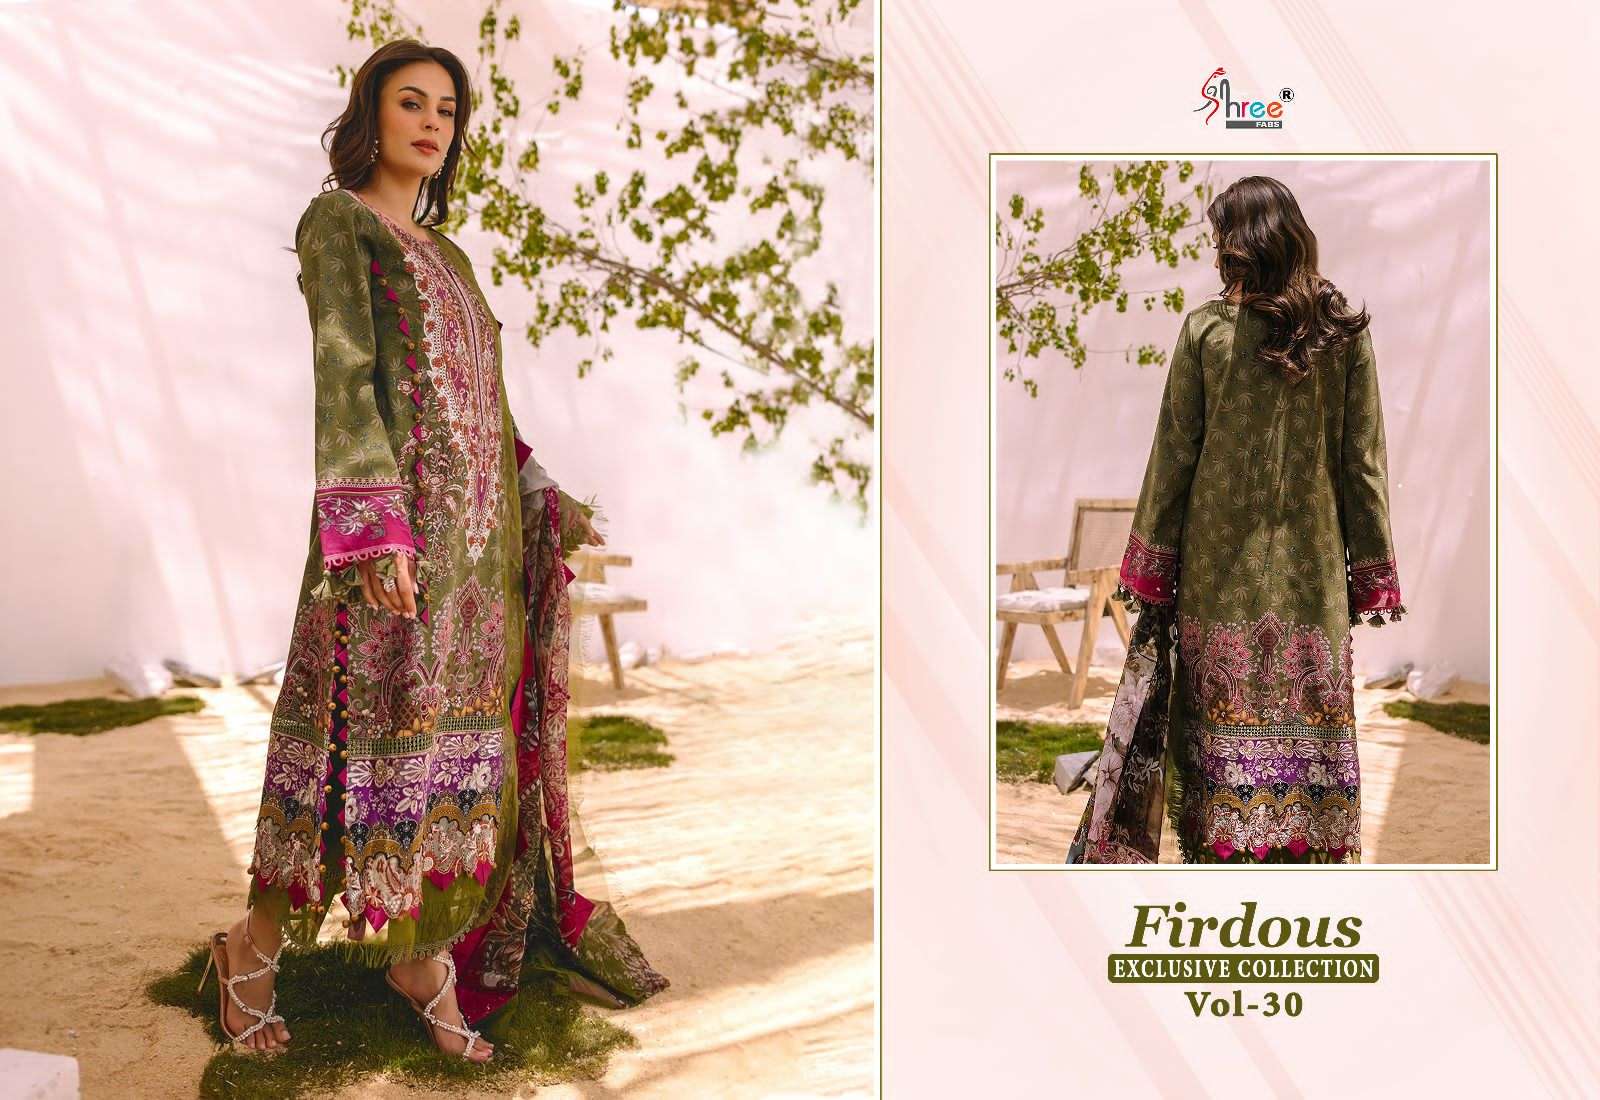 firdous exclusive collection vol-30 by shree fabs 3219-3226 series pakistani salwar kameez wholesale price